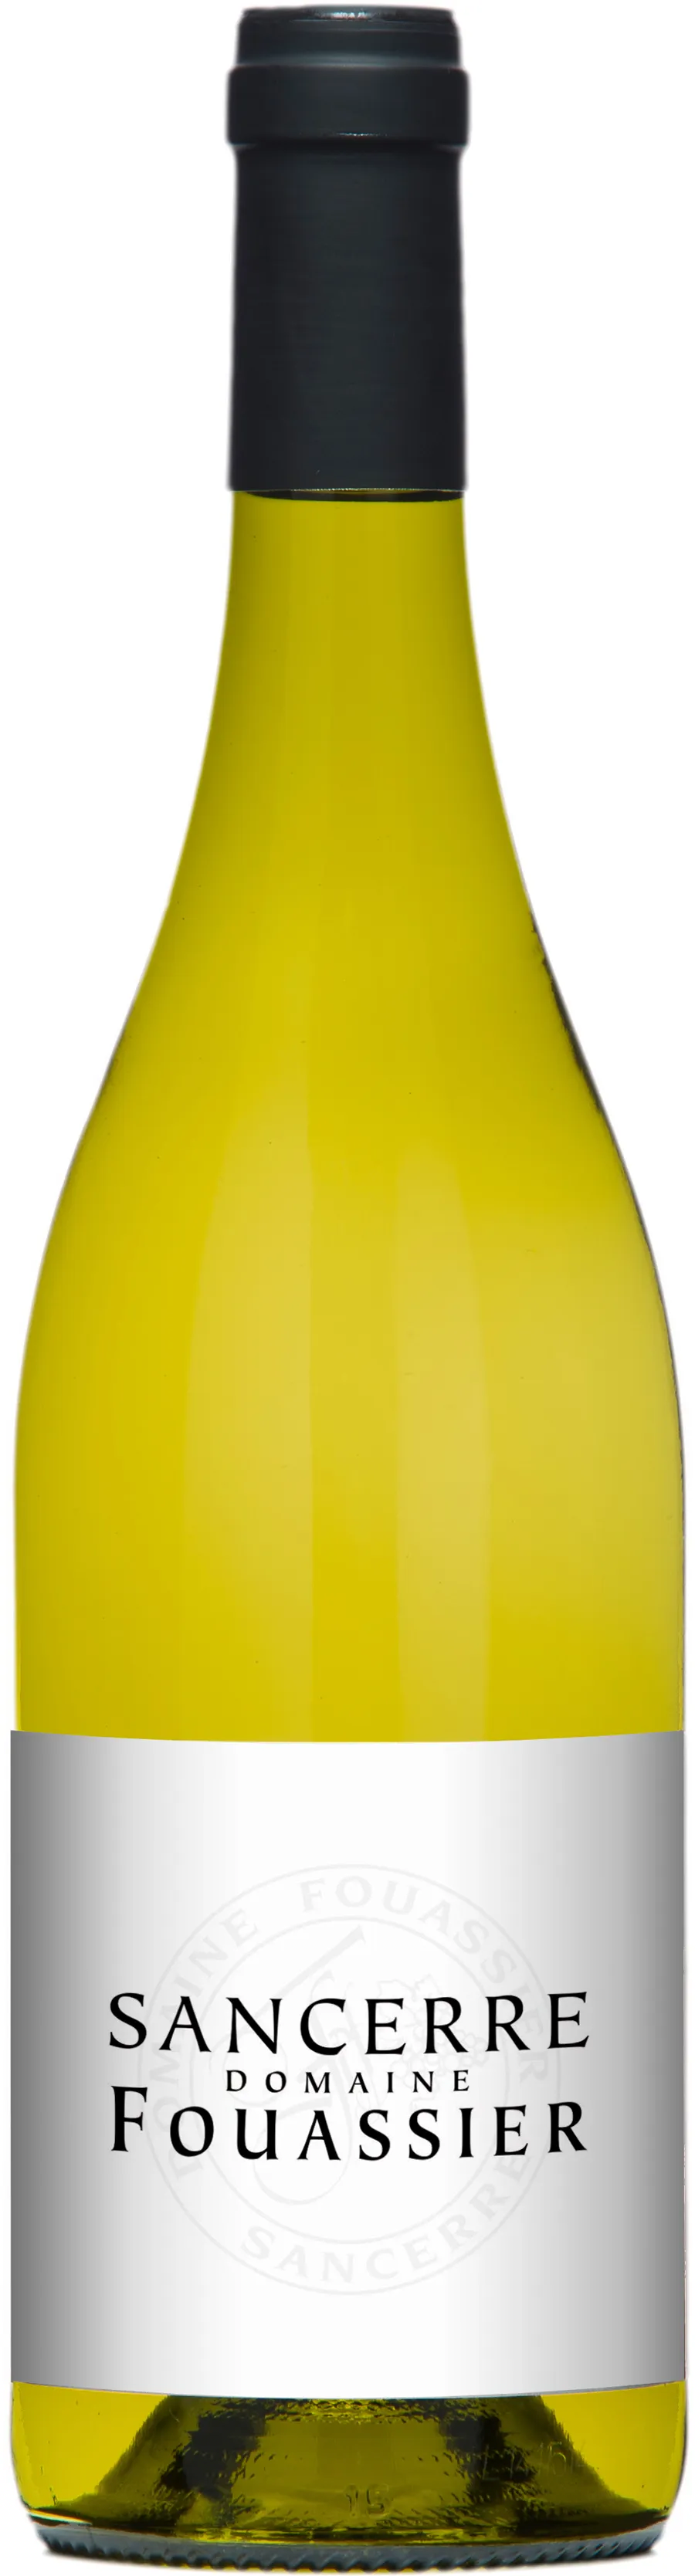 Bottle of Domaine Fouassier Sancerre from search results